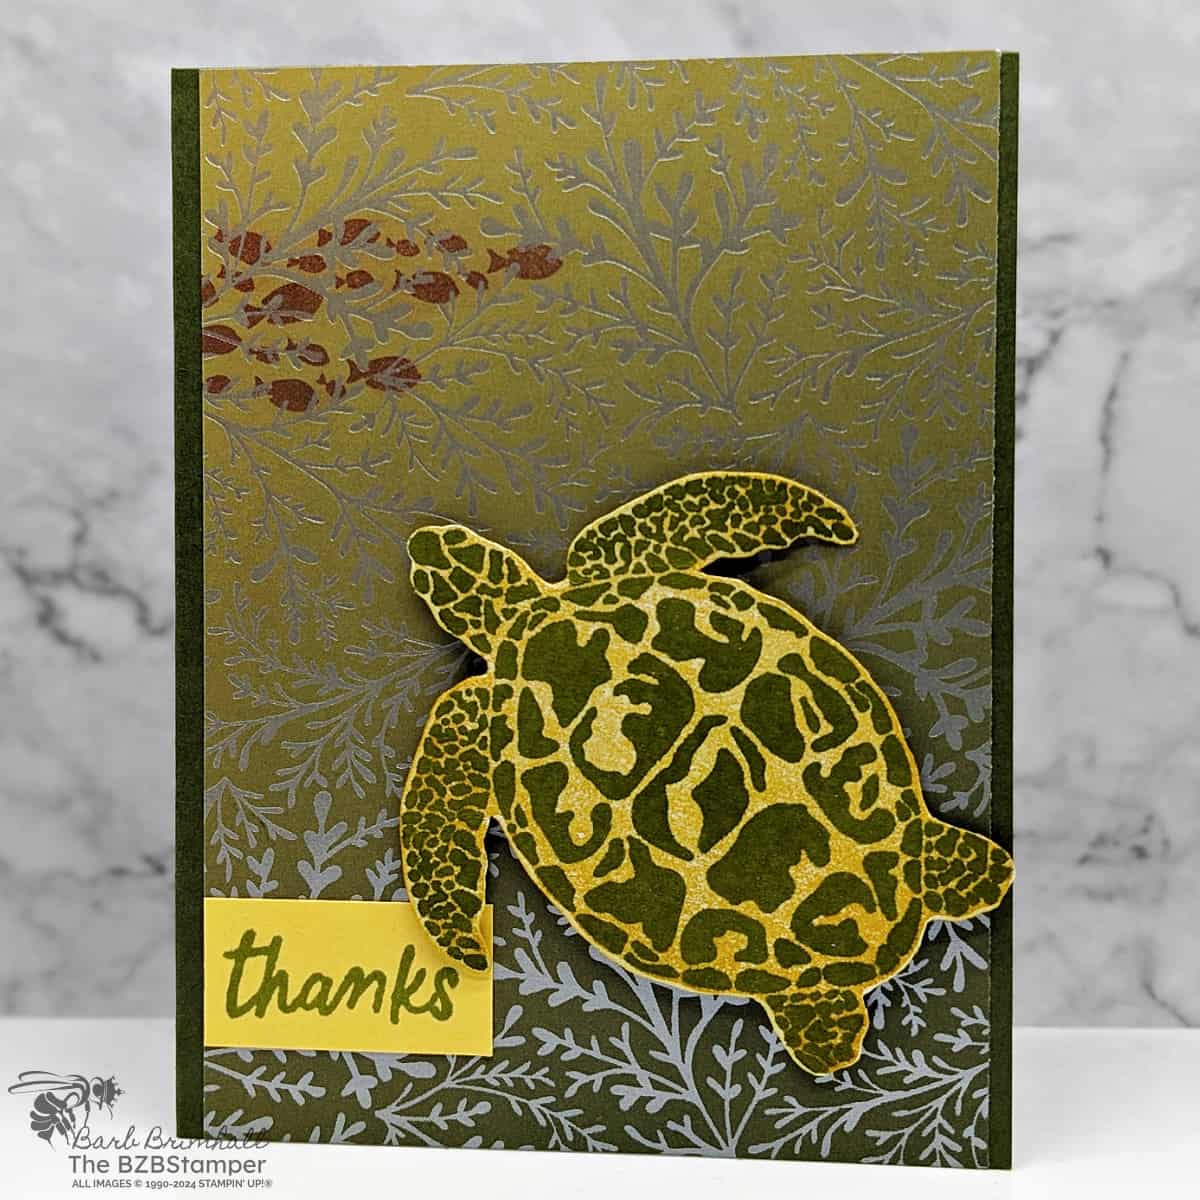 Dive into Crafting with the Sea Turtle Stamp Set in greens and browns, featuring a large turtle and school of fish with "thanks" sentiment.